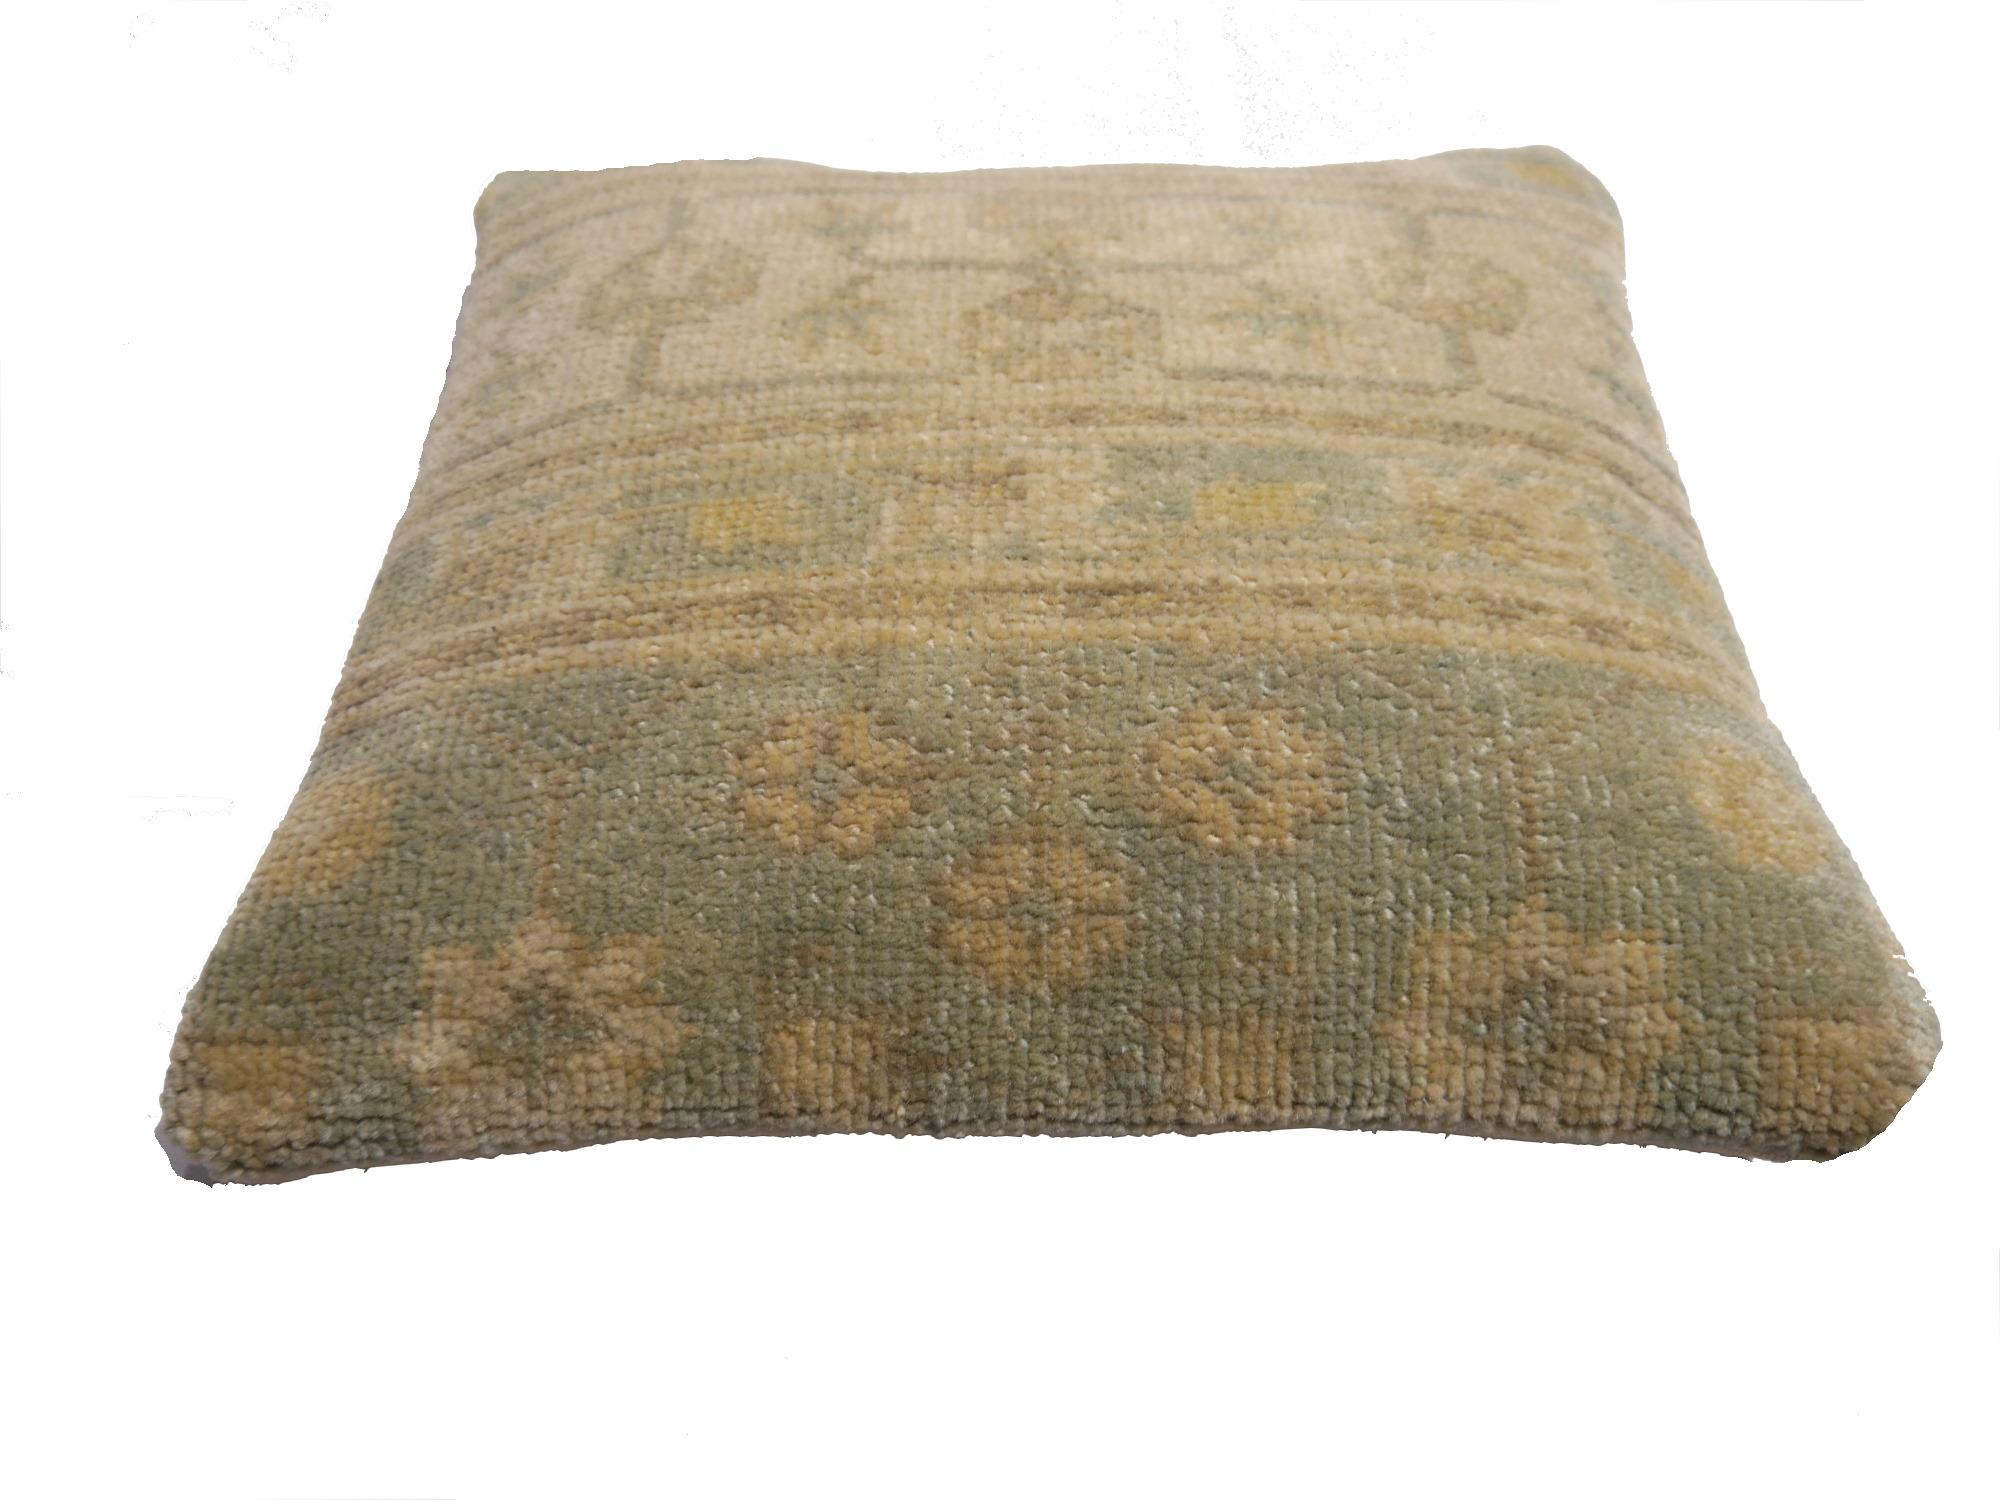 Khotan Samarkand Decorative Hand Knotted Rug Pillow Cover In New Condition For Sale In Lohr, Bavaria, DE